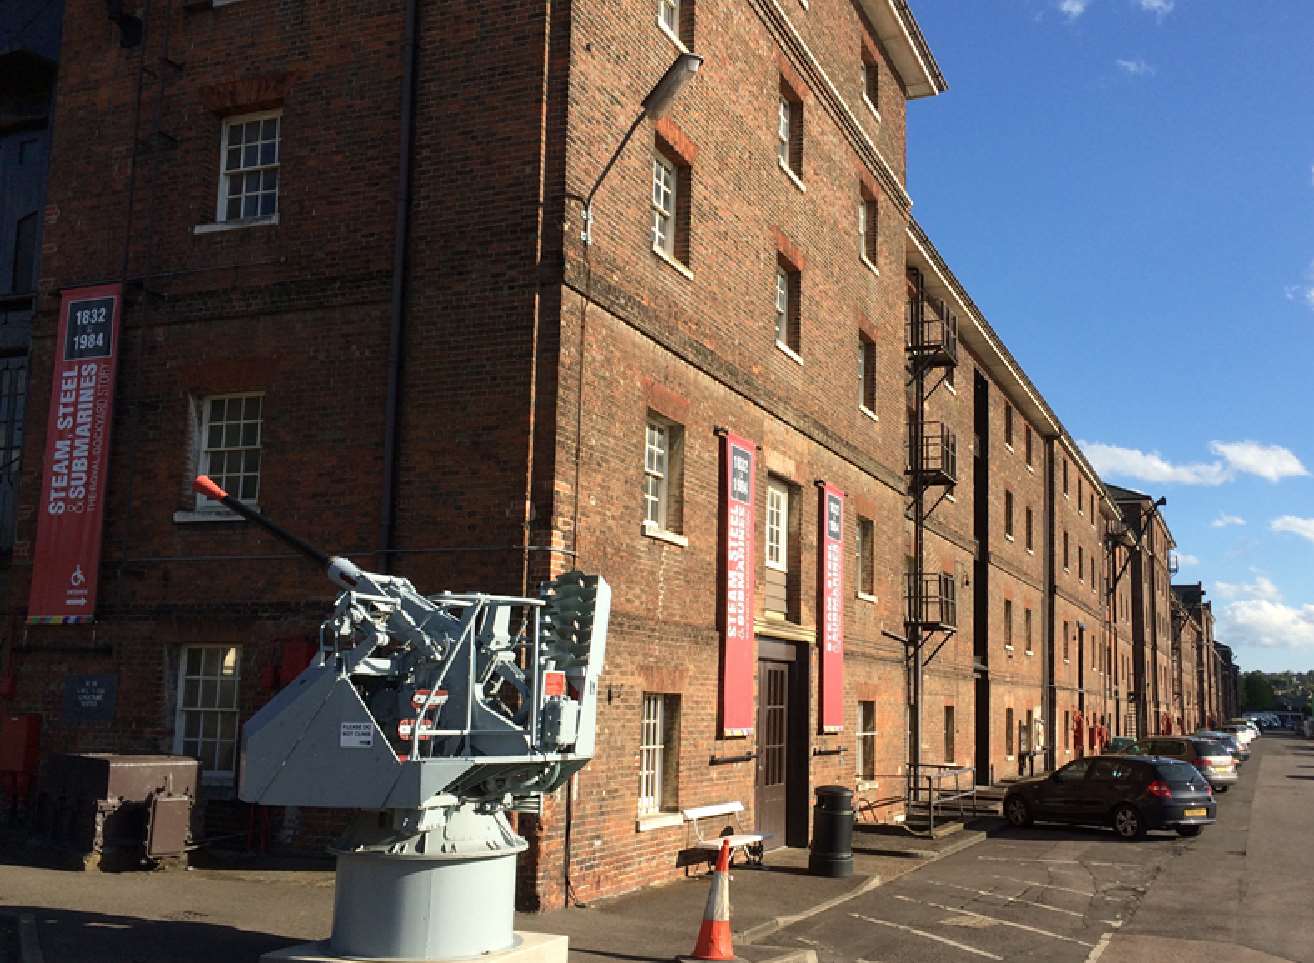 The Fitted Rigging House project will get £4.8m in Heritage Lottery funding